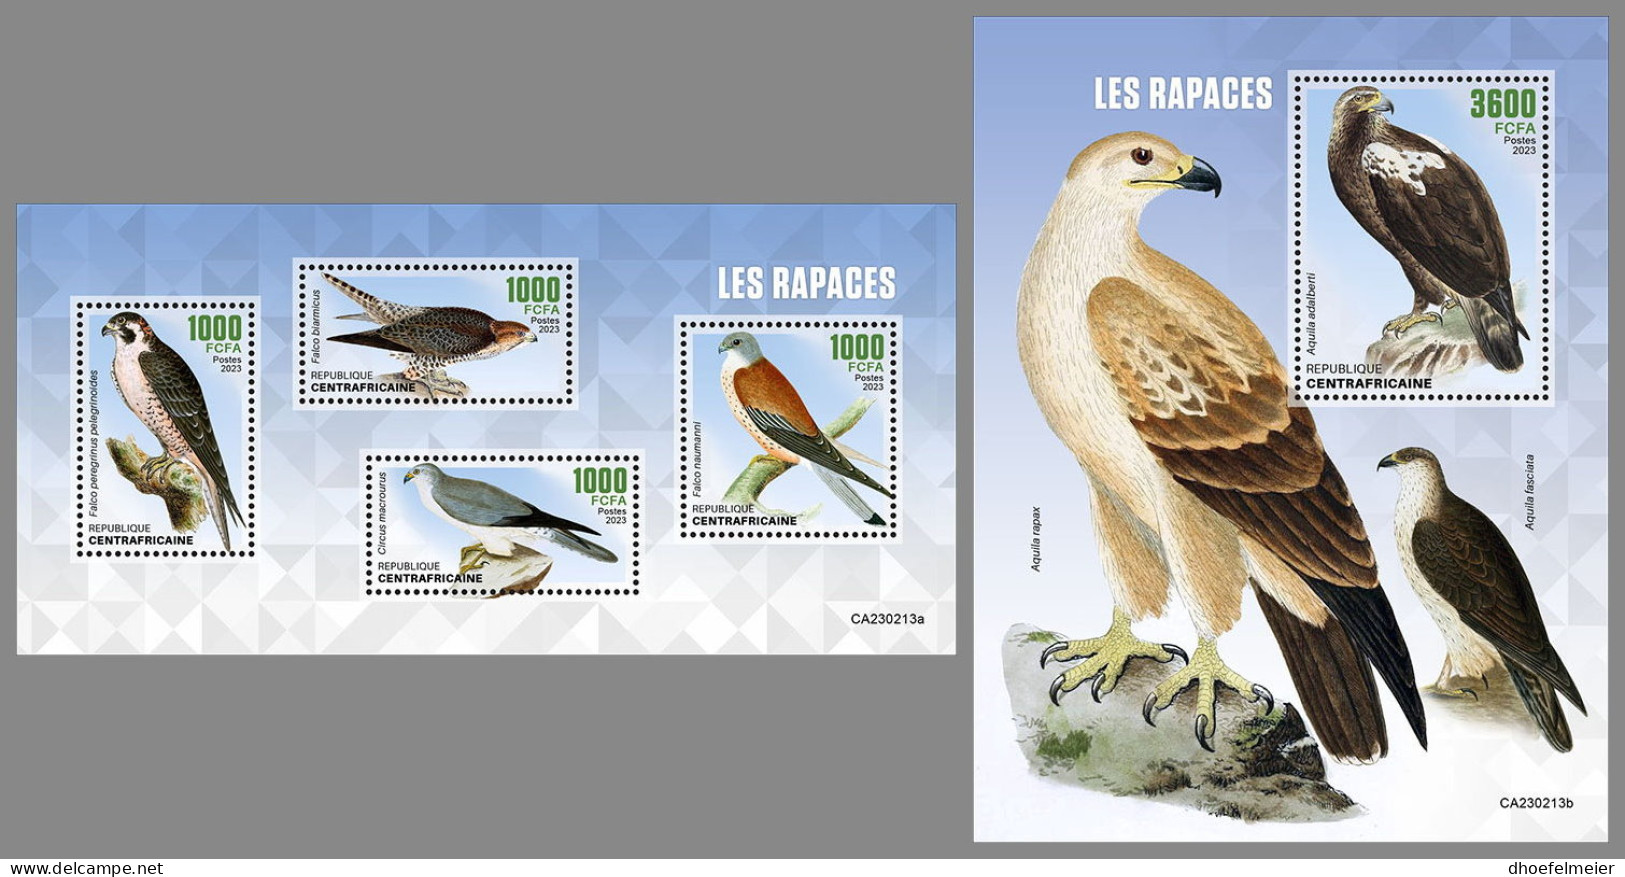 CENTRAL AFRICAN 2023 MNH Birds Of Prey Greifvögel Raubvögel Rapaces M/S+S/S - OFFICIAL ISSUE - DHQ2340 - Aigles & Rapaces Diurnes